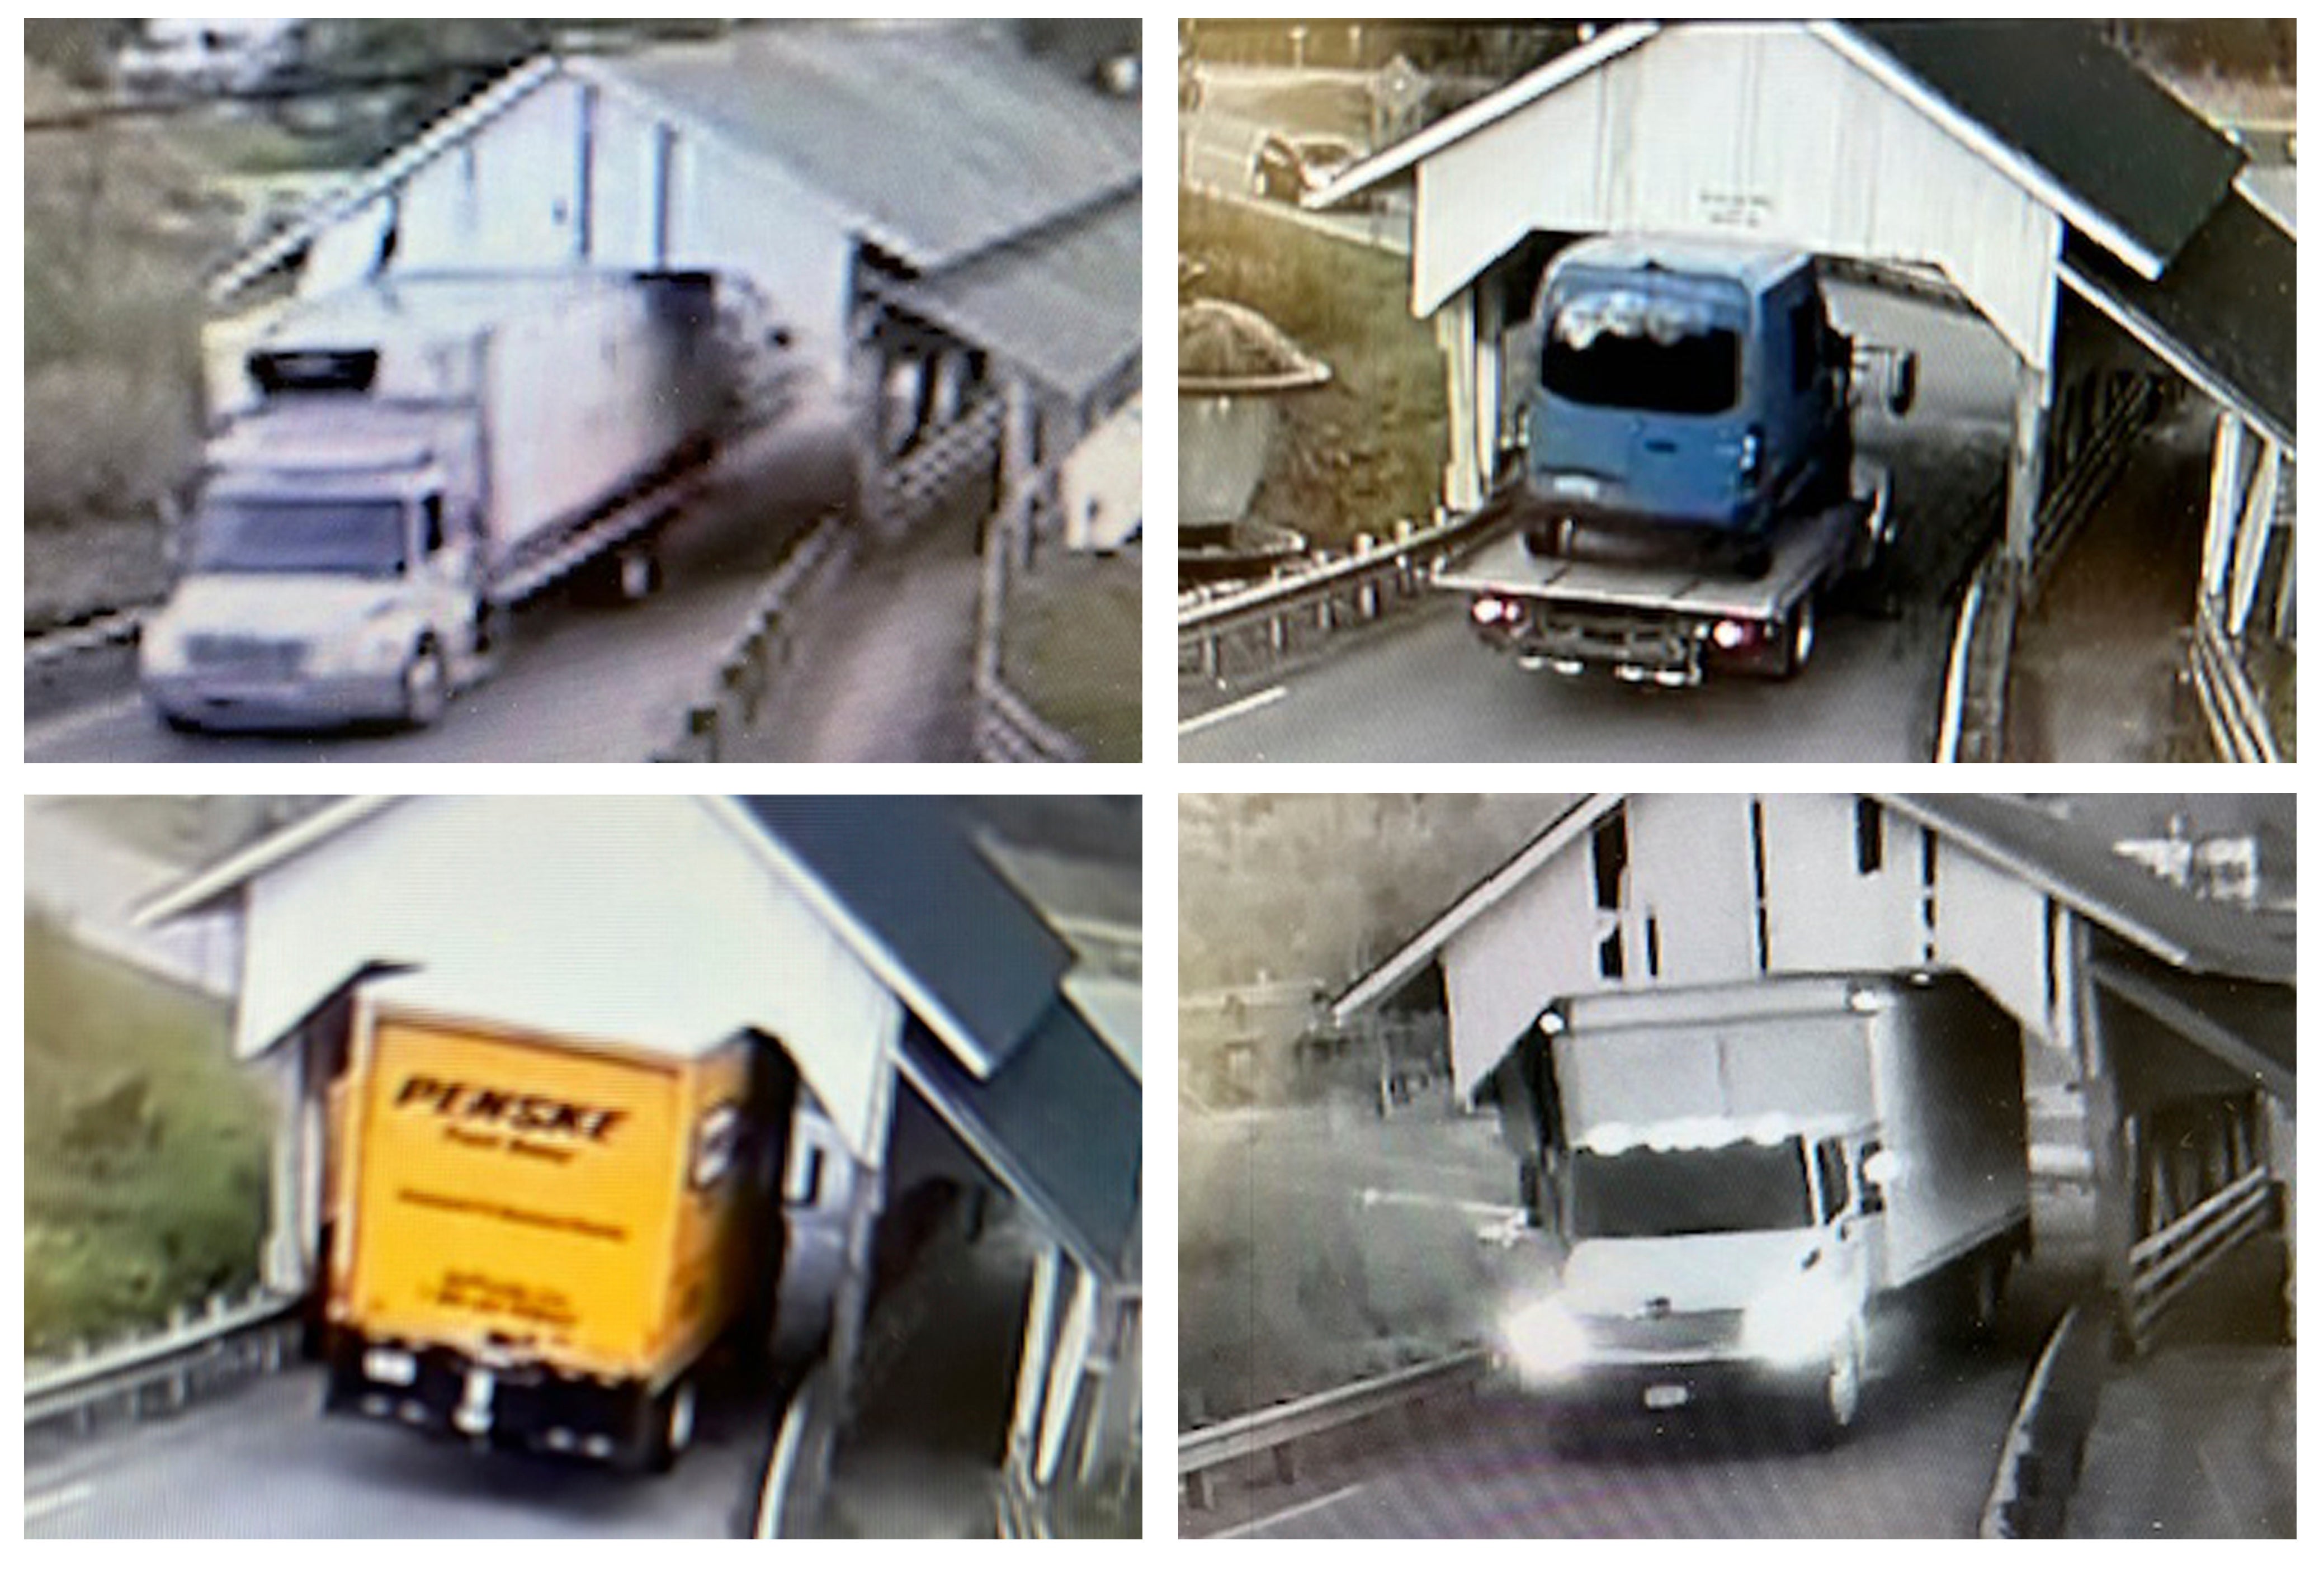 This selection of undated still frames from security video camera footage provided by Michael Grant shows a variety of oversized box trucks crashing through the historic Miller's Run covered bridge in Lyndon